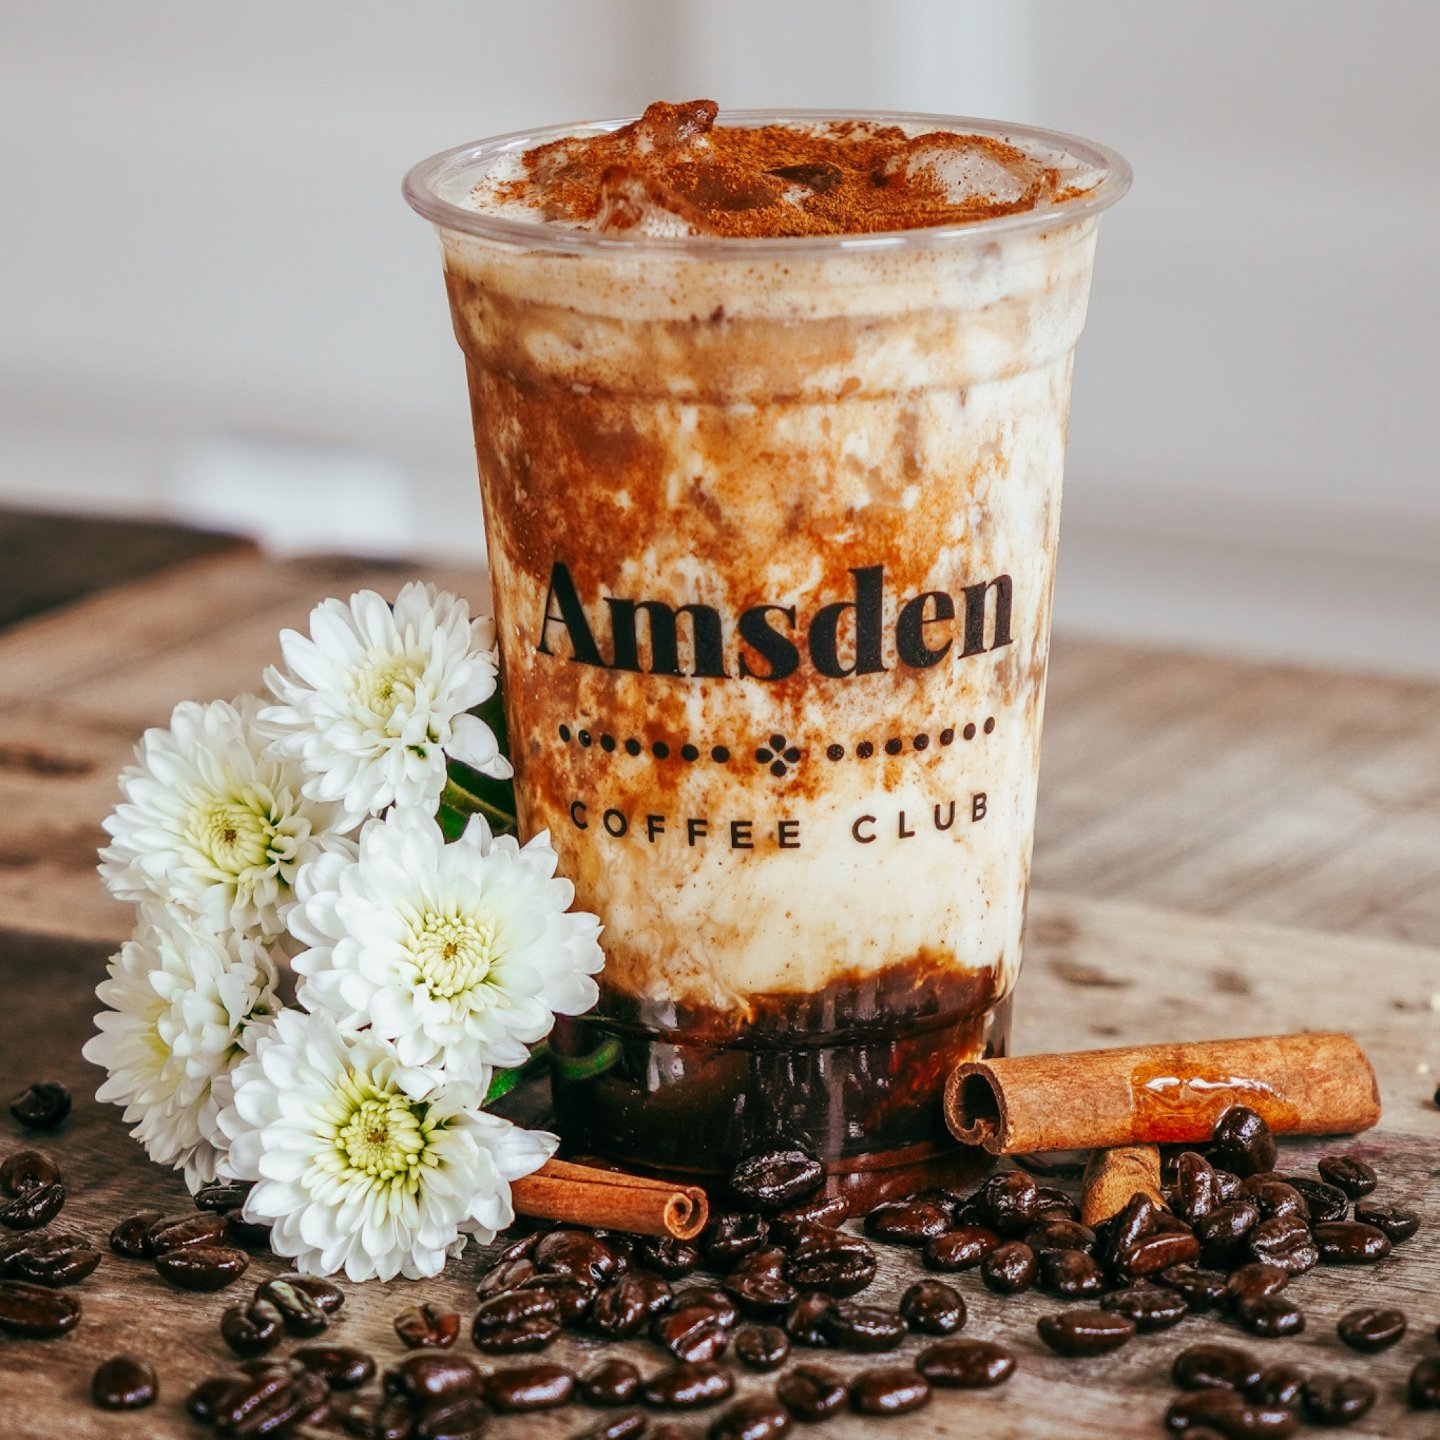 🍯✨ Wake up and shake it up with our Iced Cinnamon Honey Shaken Espresso with Oat Milk! 🎉💃 Get your caffeine fix with a dash of sweetness and a whole lot of sass! Who knew coffee could be this deliciously fun? 😋✨ 

#theamsden #amsden #amsdencoffee